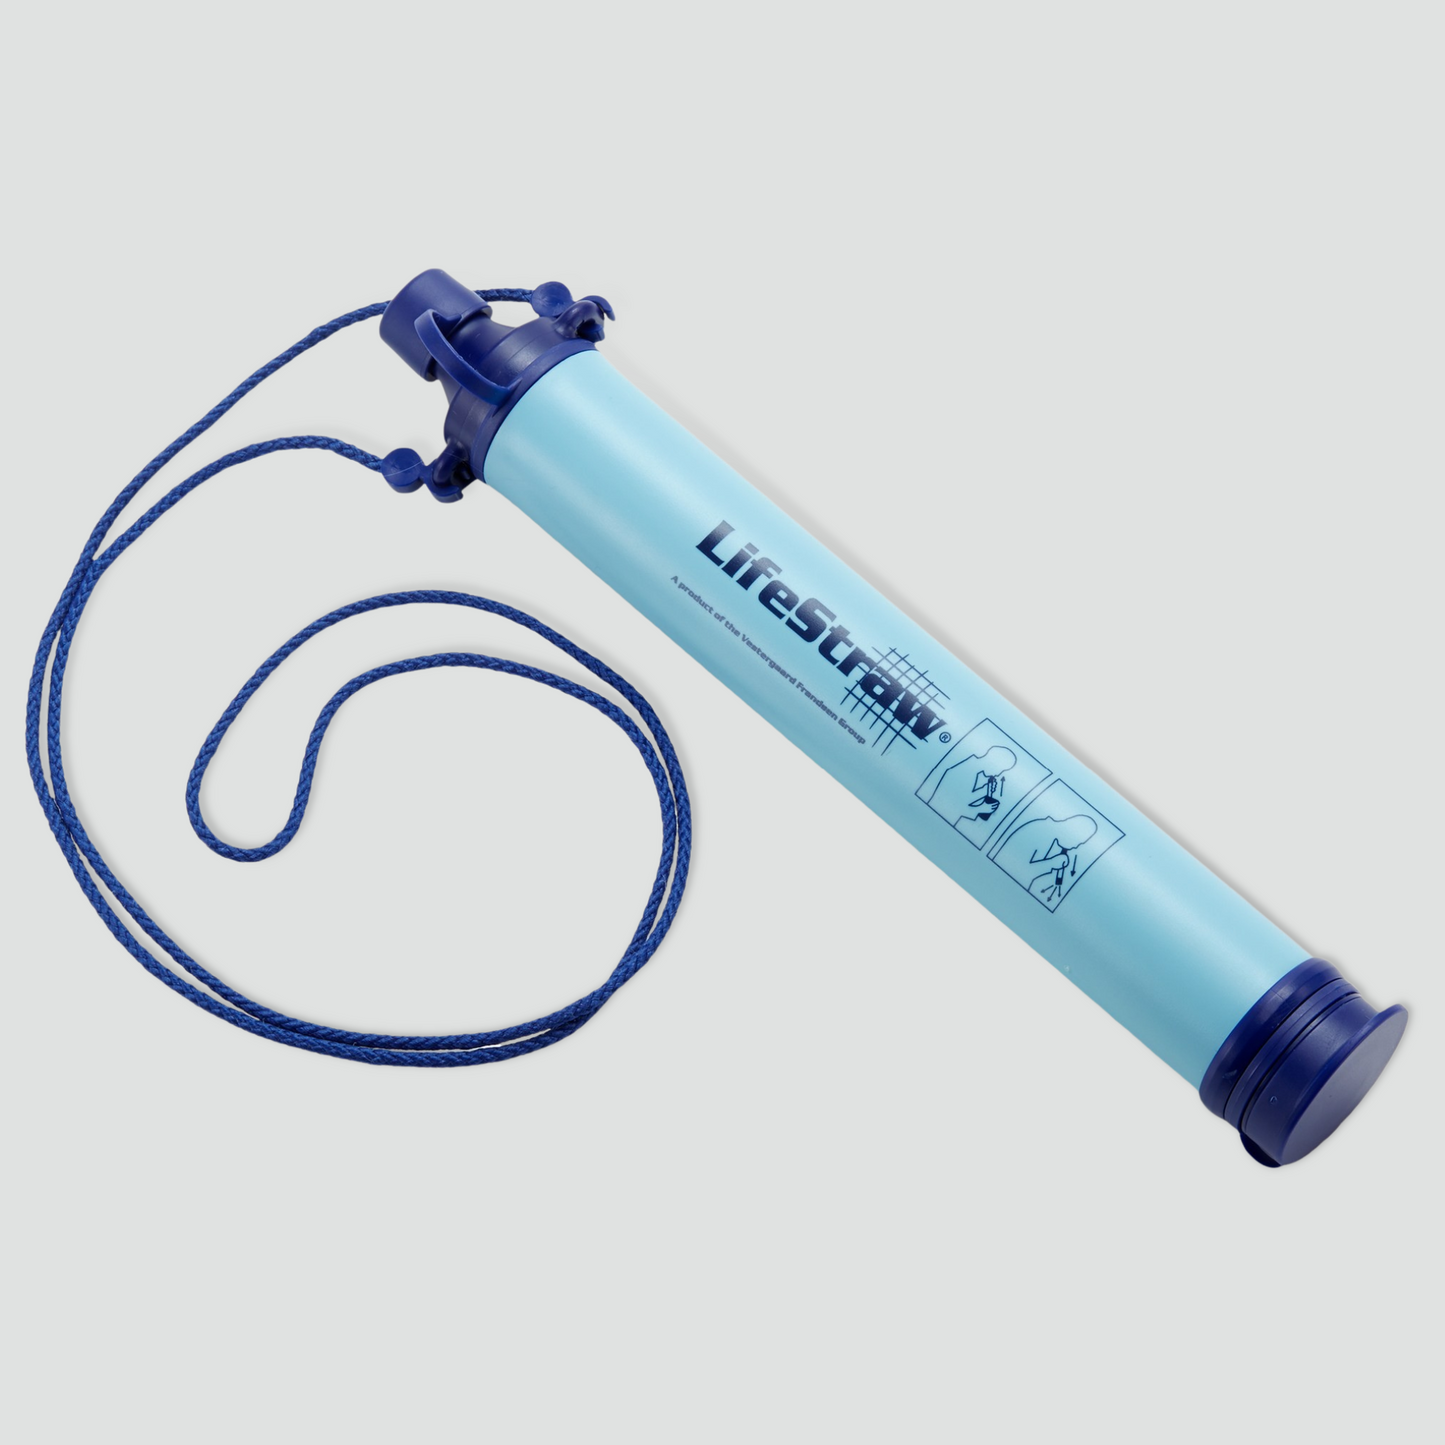 LifeStraw Personal water filter for outdoor adventures, camping or emergencies